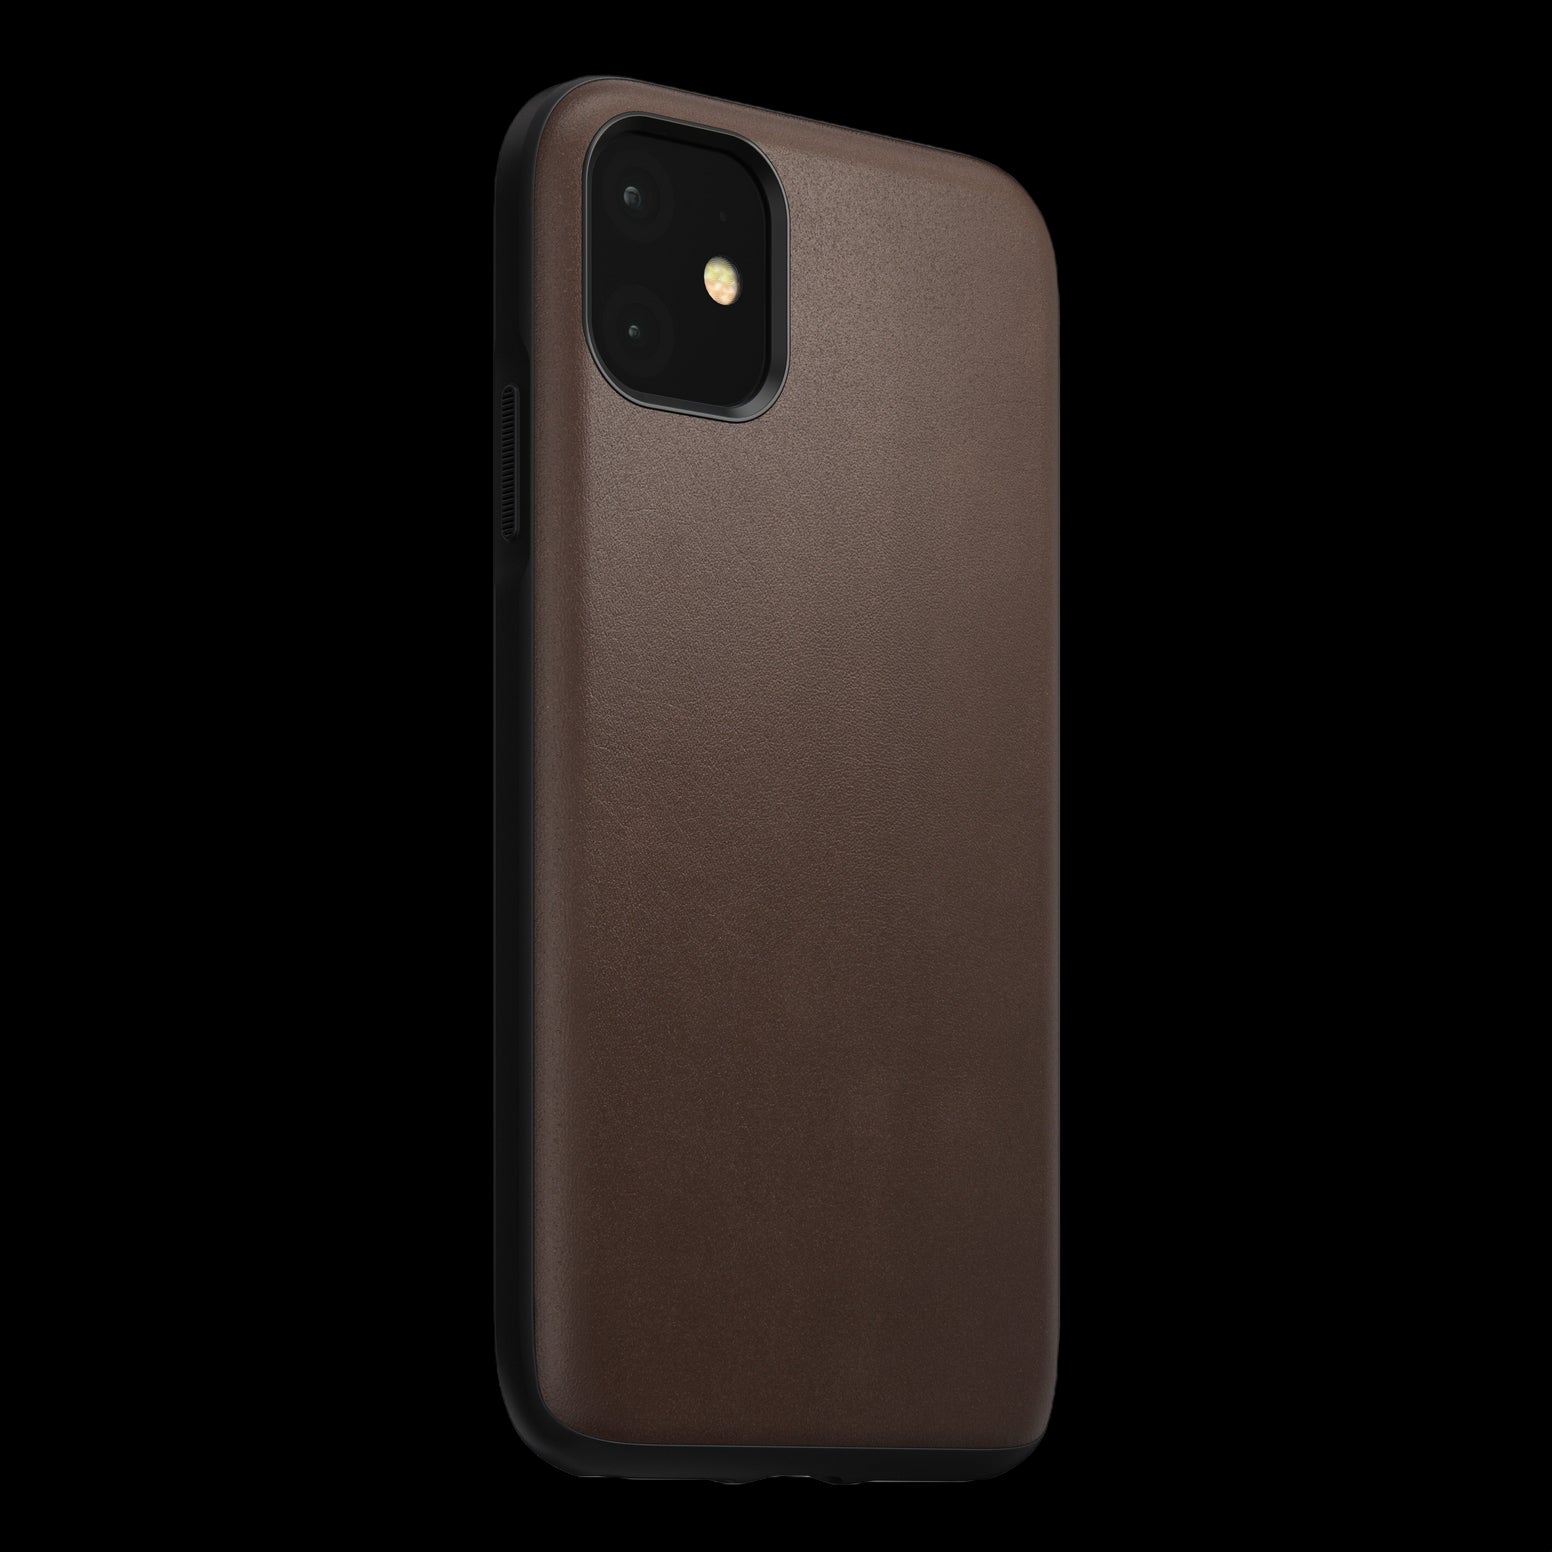 Nomad Rugged Leather Case for iPhone 11 - Rustic Brown - Discontinued